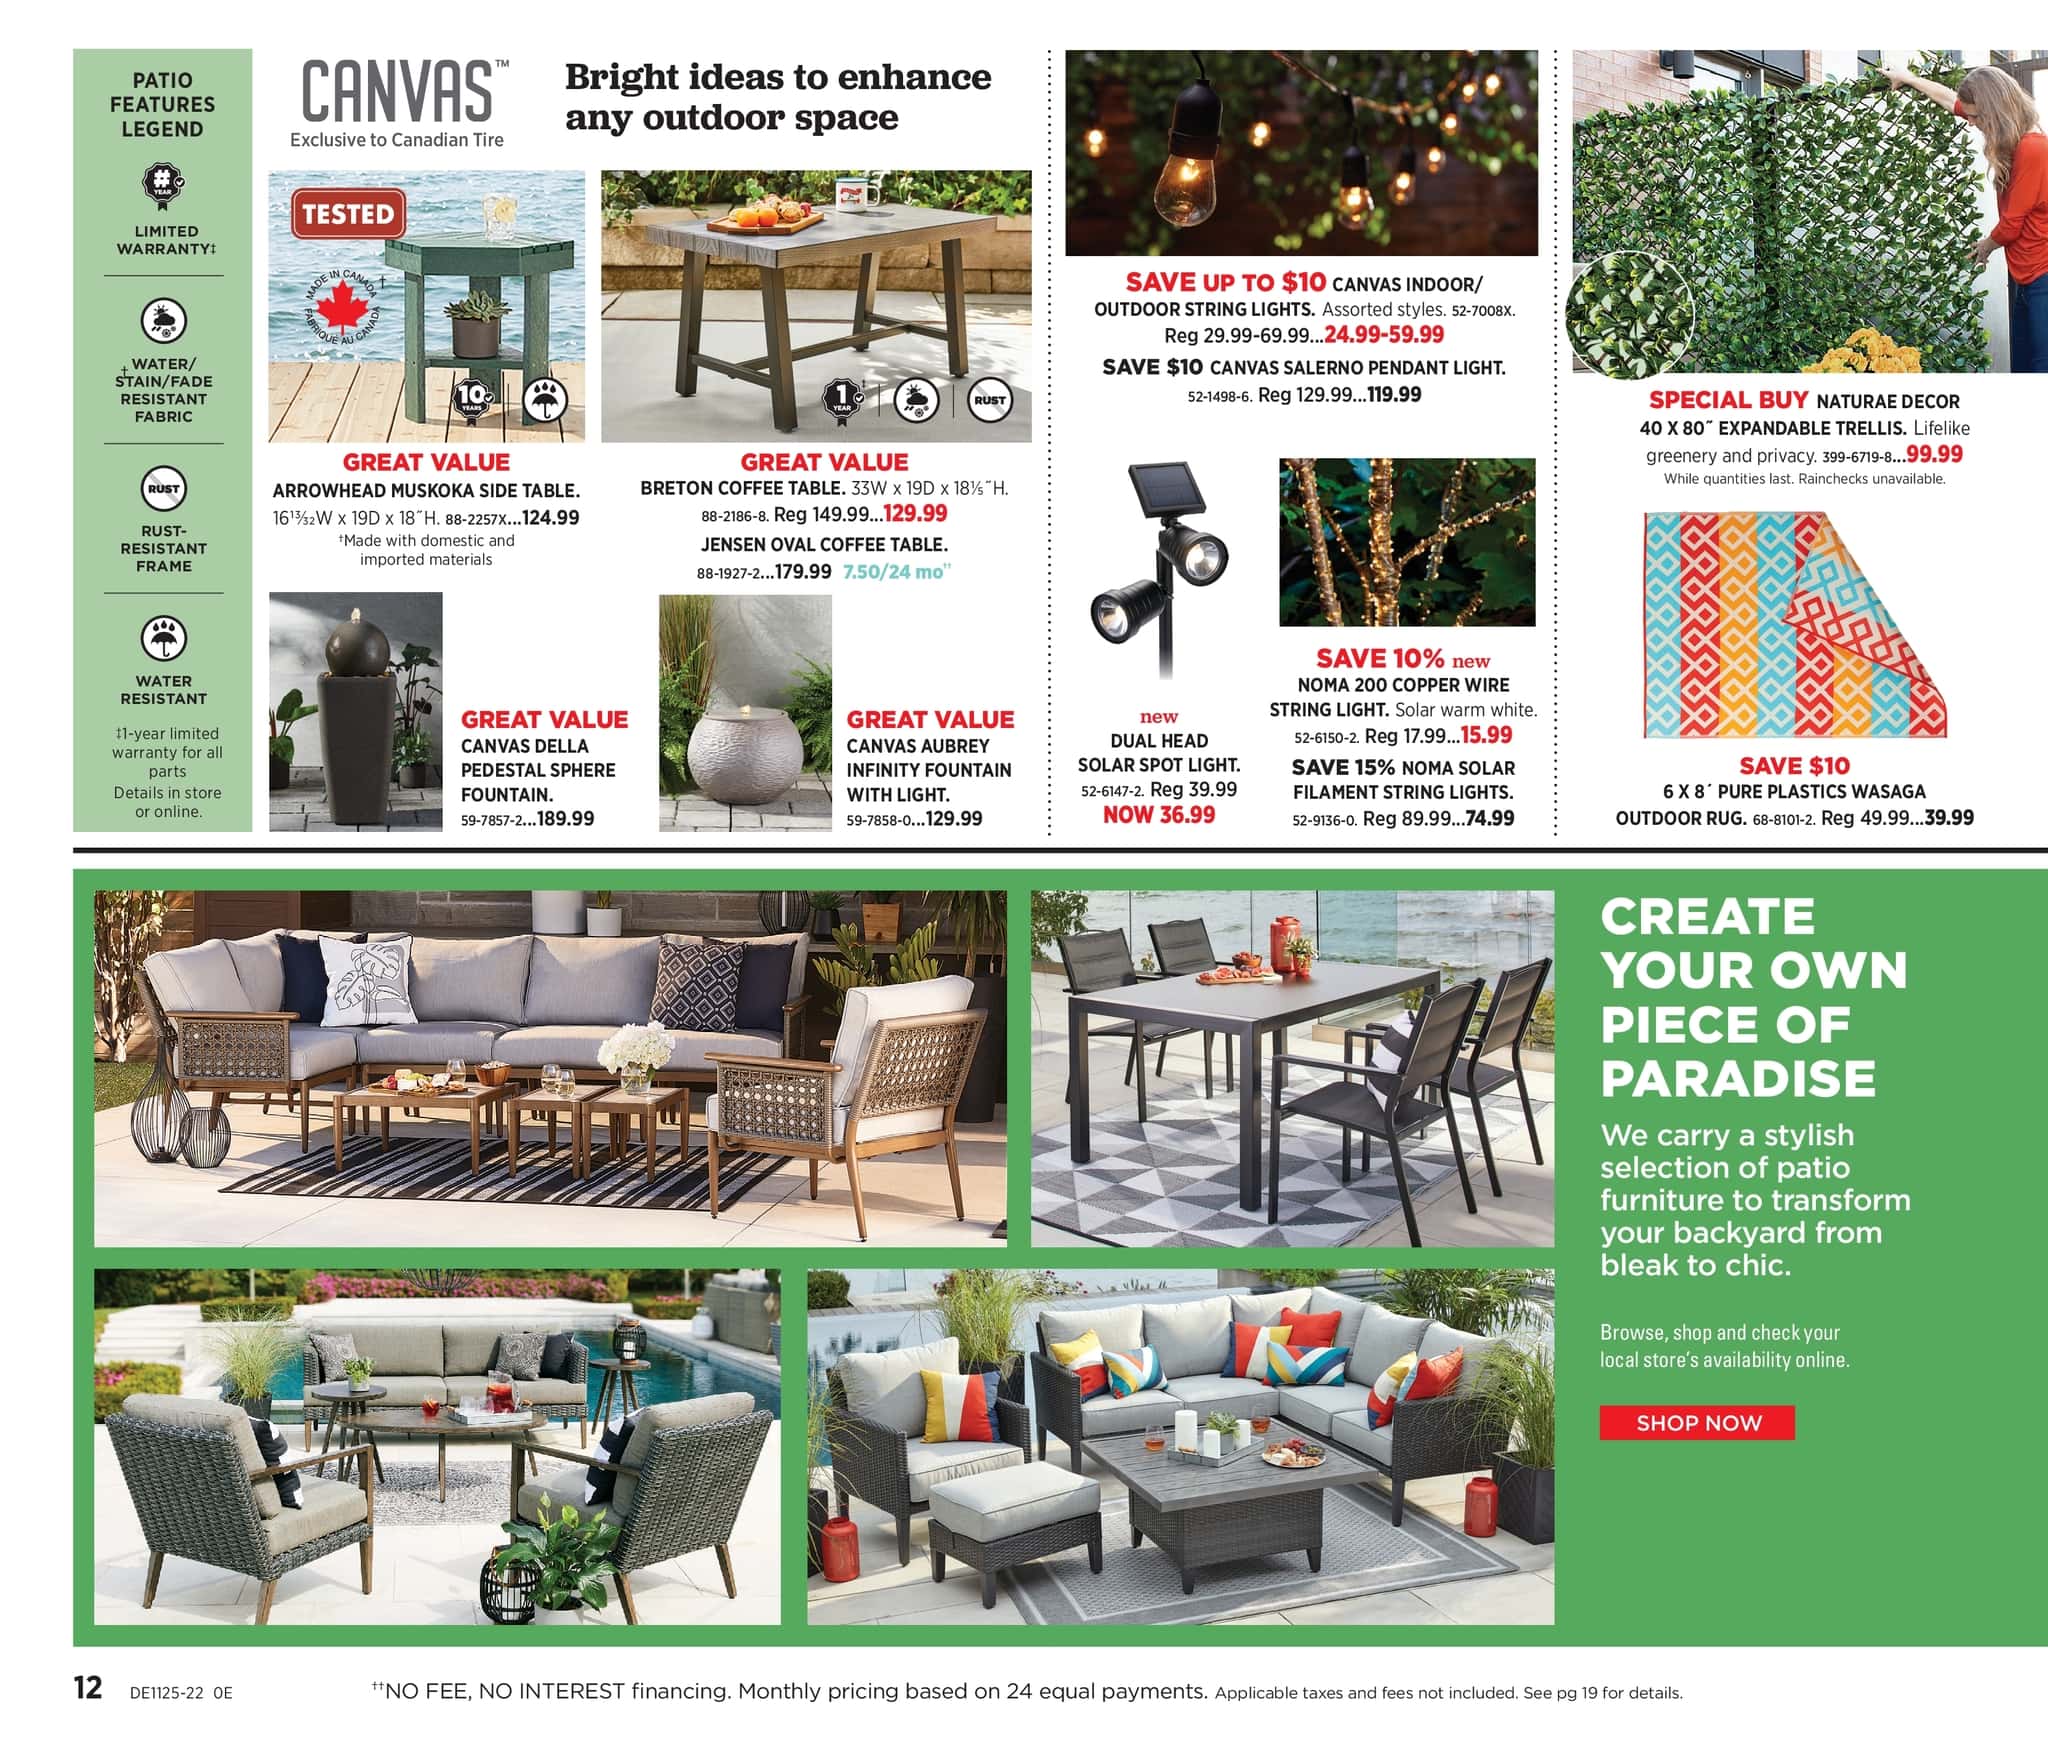 Canadian Tire - Summer Inspirations - Page 12